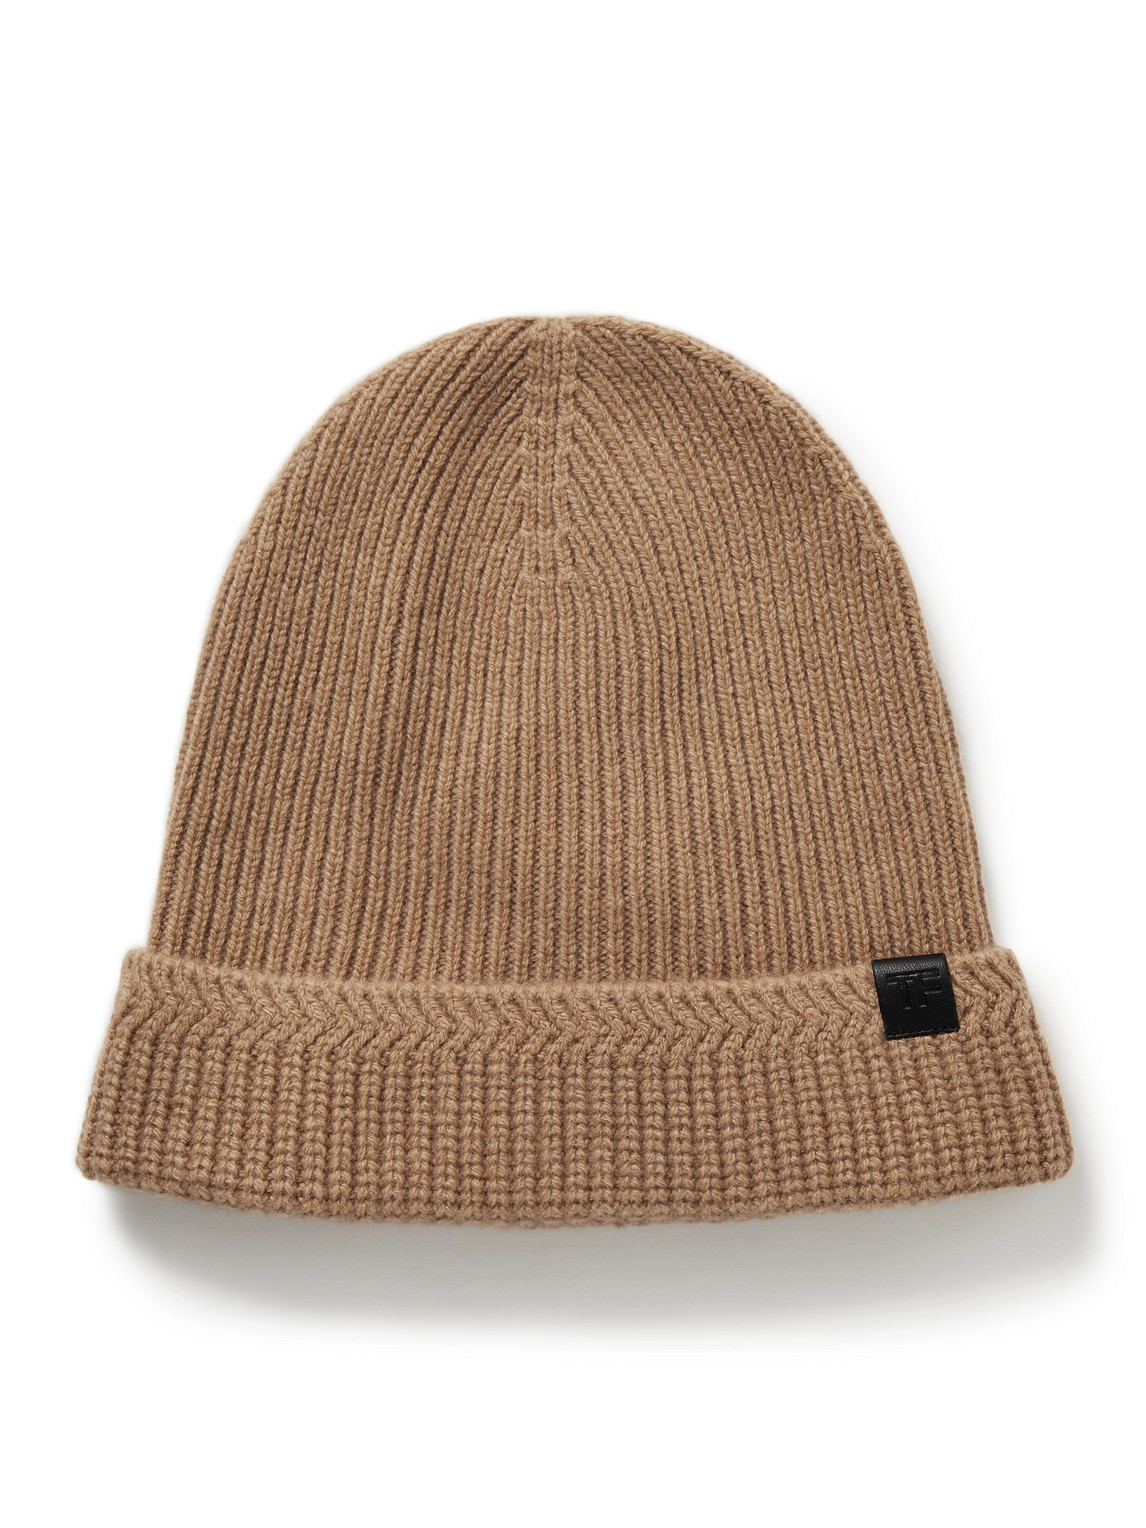 TOM FORD - Leather-Trimmed Ribbed Wool and Cashmere-Blend Beanie - Men - Neutrals - XL von TOM FORD